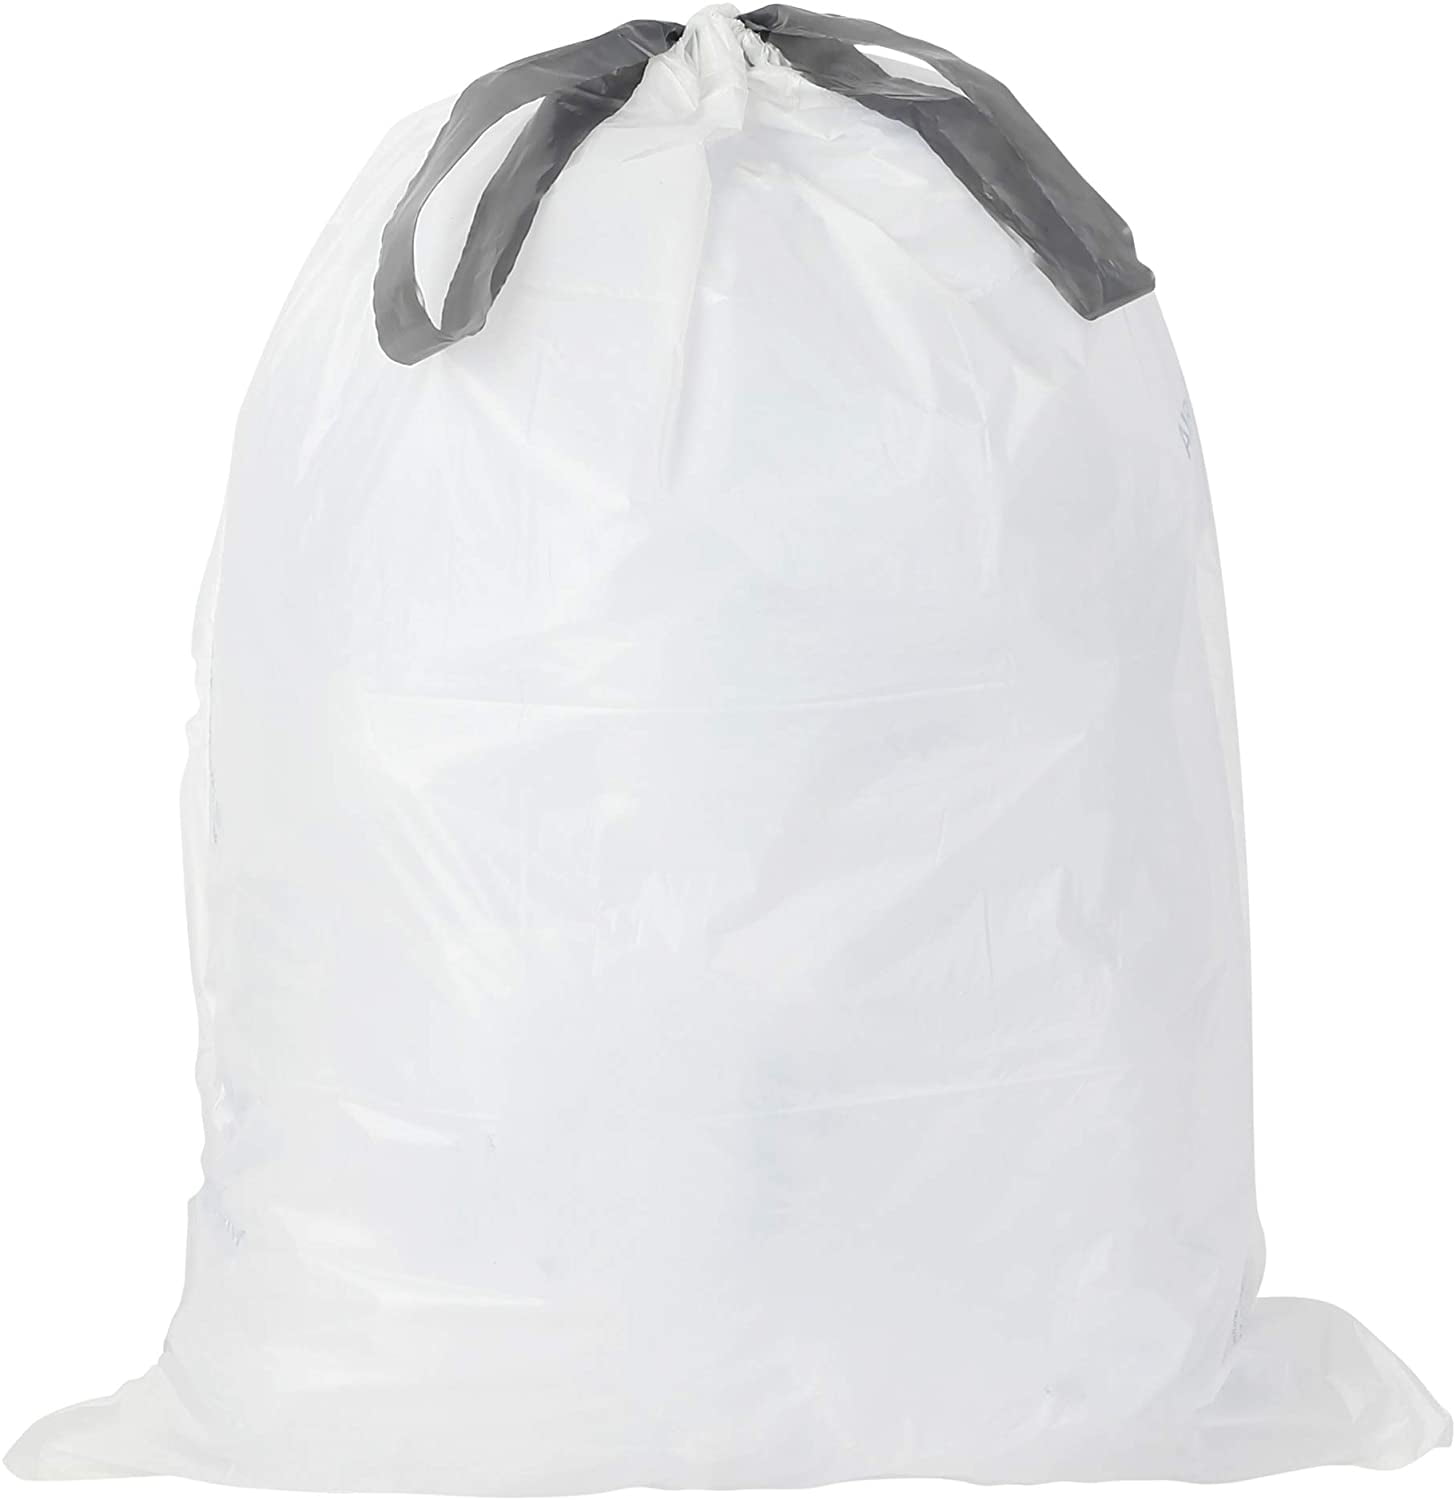 Plasticplace 5 Gallon Trash Bags │ 0.9 Mil │ White Drawstring Garbage Liners for Bucket │ 19 X 25 100 Count 